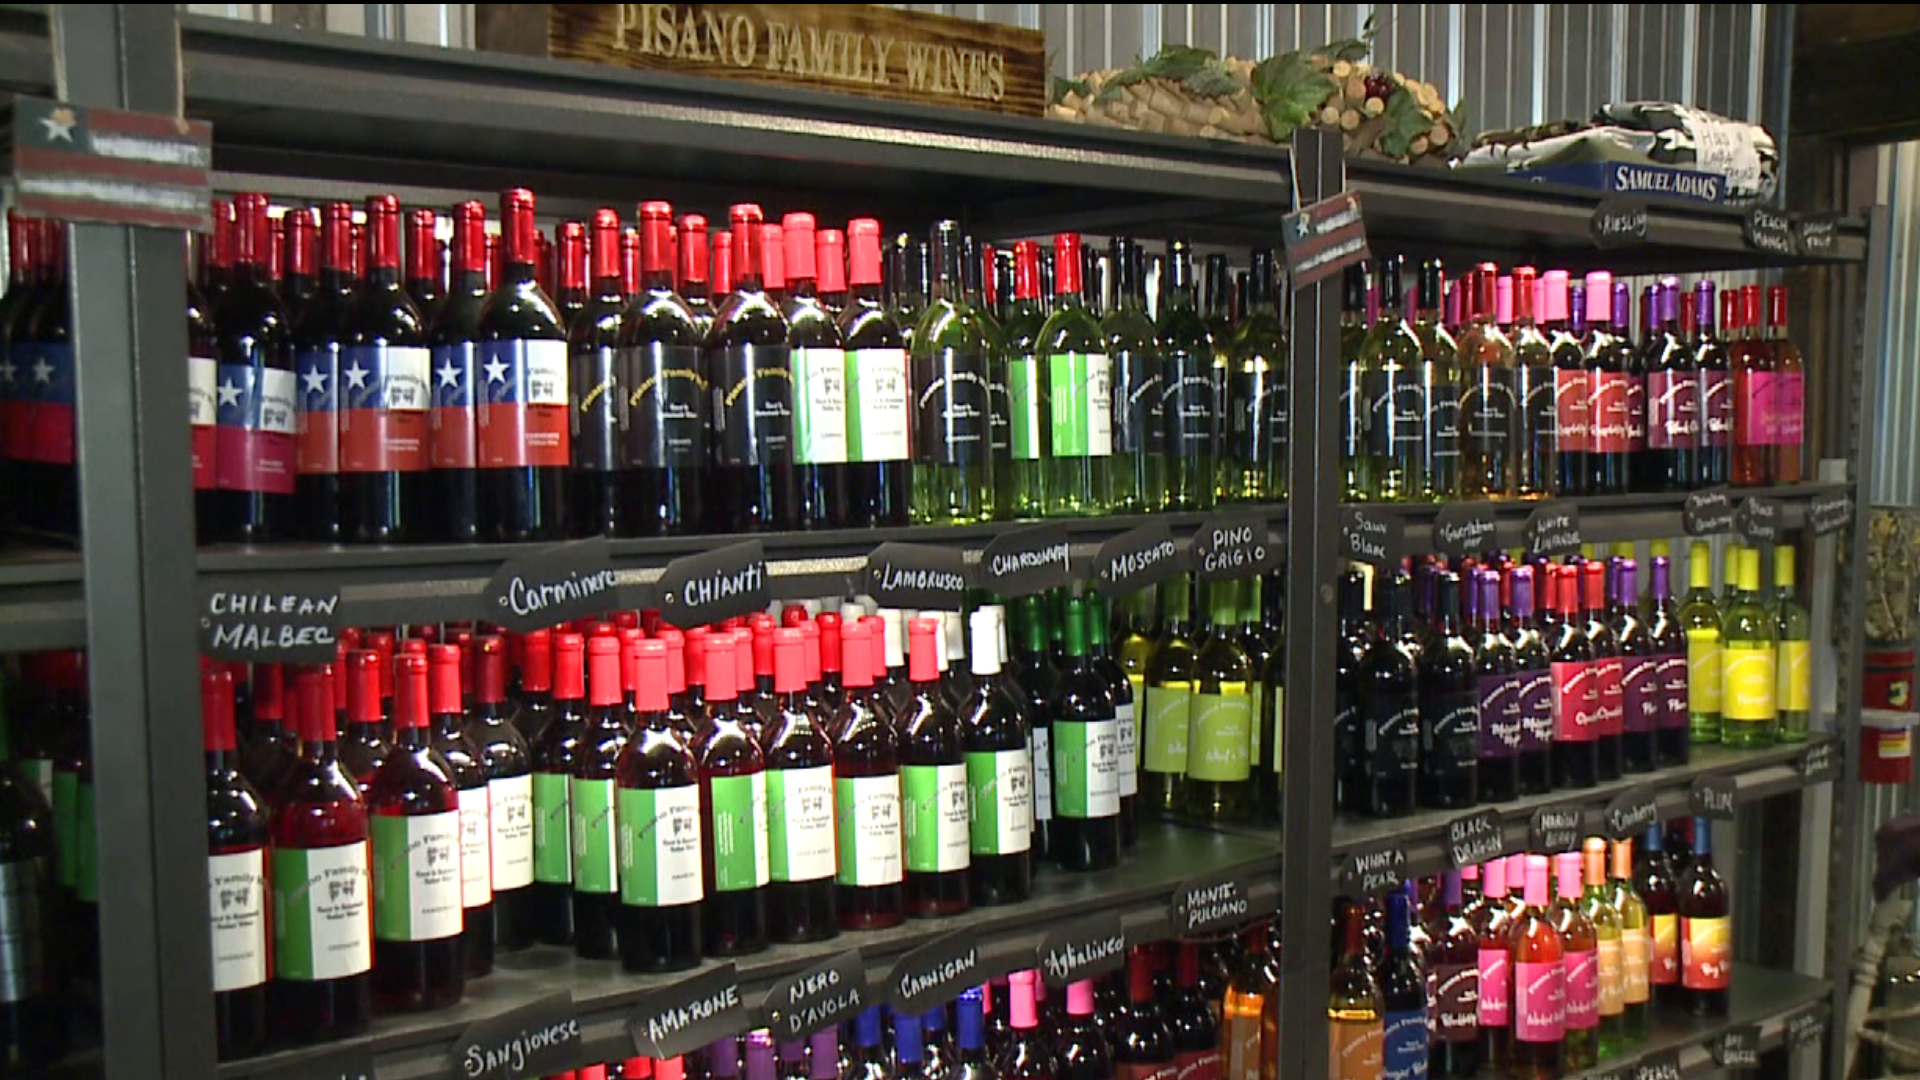 Owners of Pisano Family Wines say a zoning officer visited the spot in Lehman Township in August to say they were in violation of a zoning ordinance.